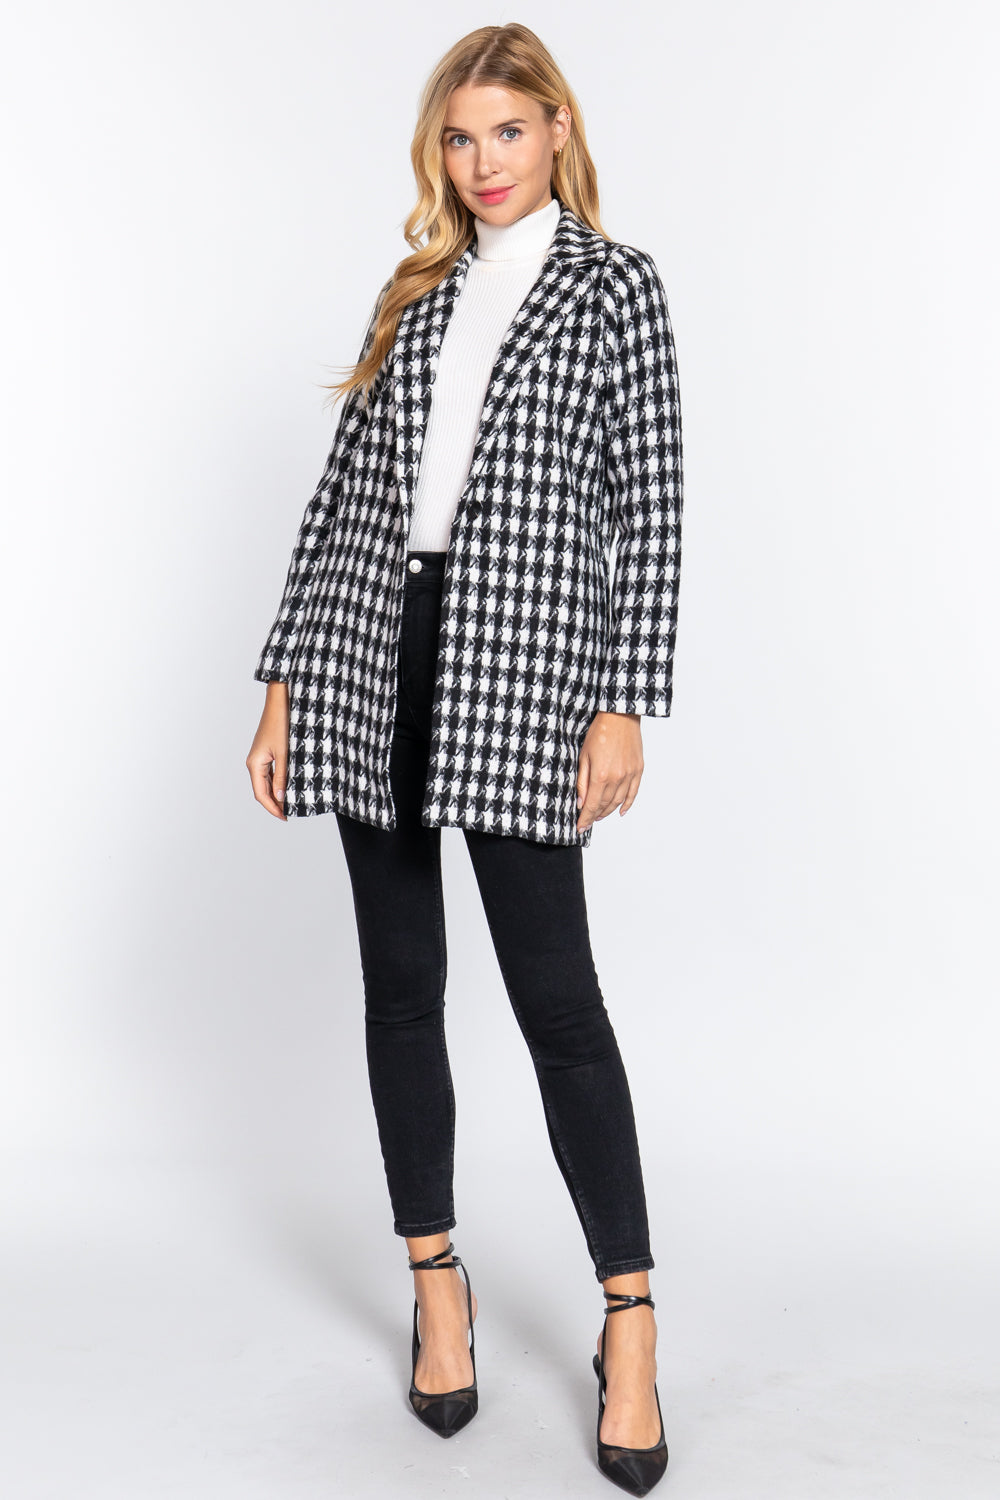 Long Slv One Button Jacquard Jacket - women's jacket at TFC&H Co.